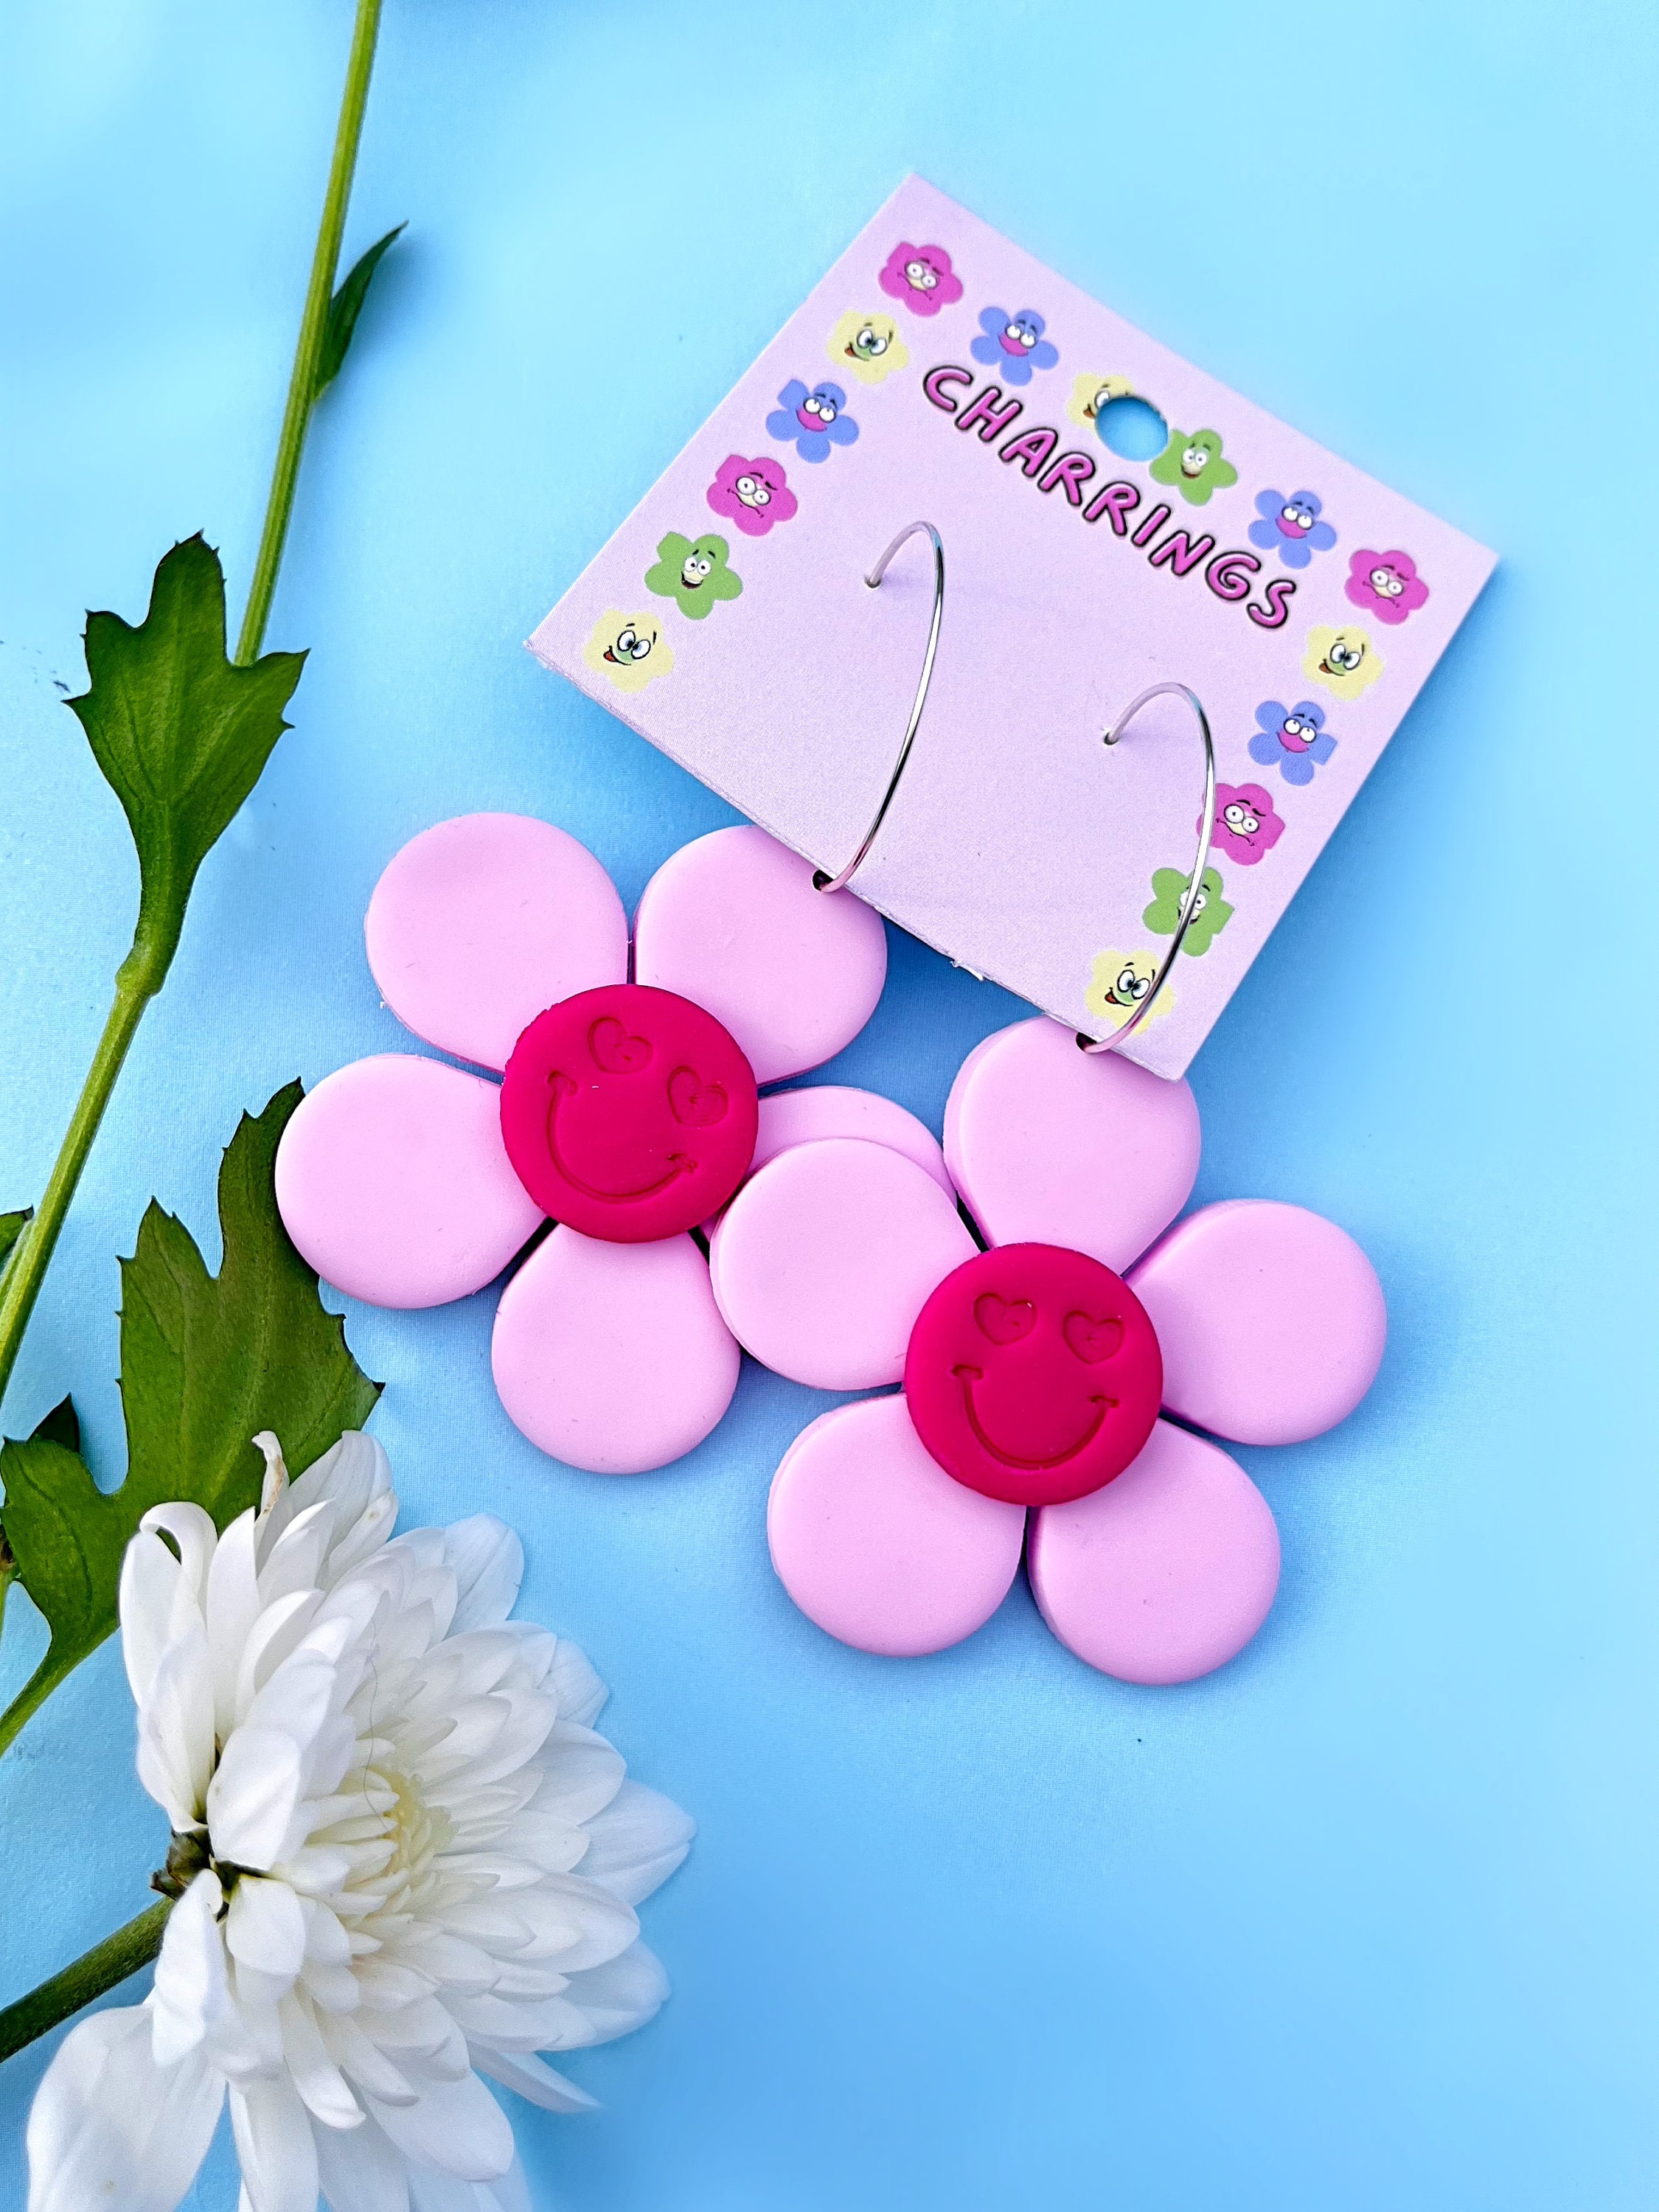 Amazing Clay Flowers: Creating Realistic Flowers and Floral (New